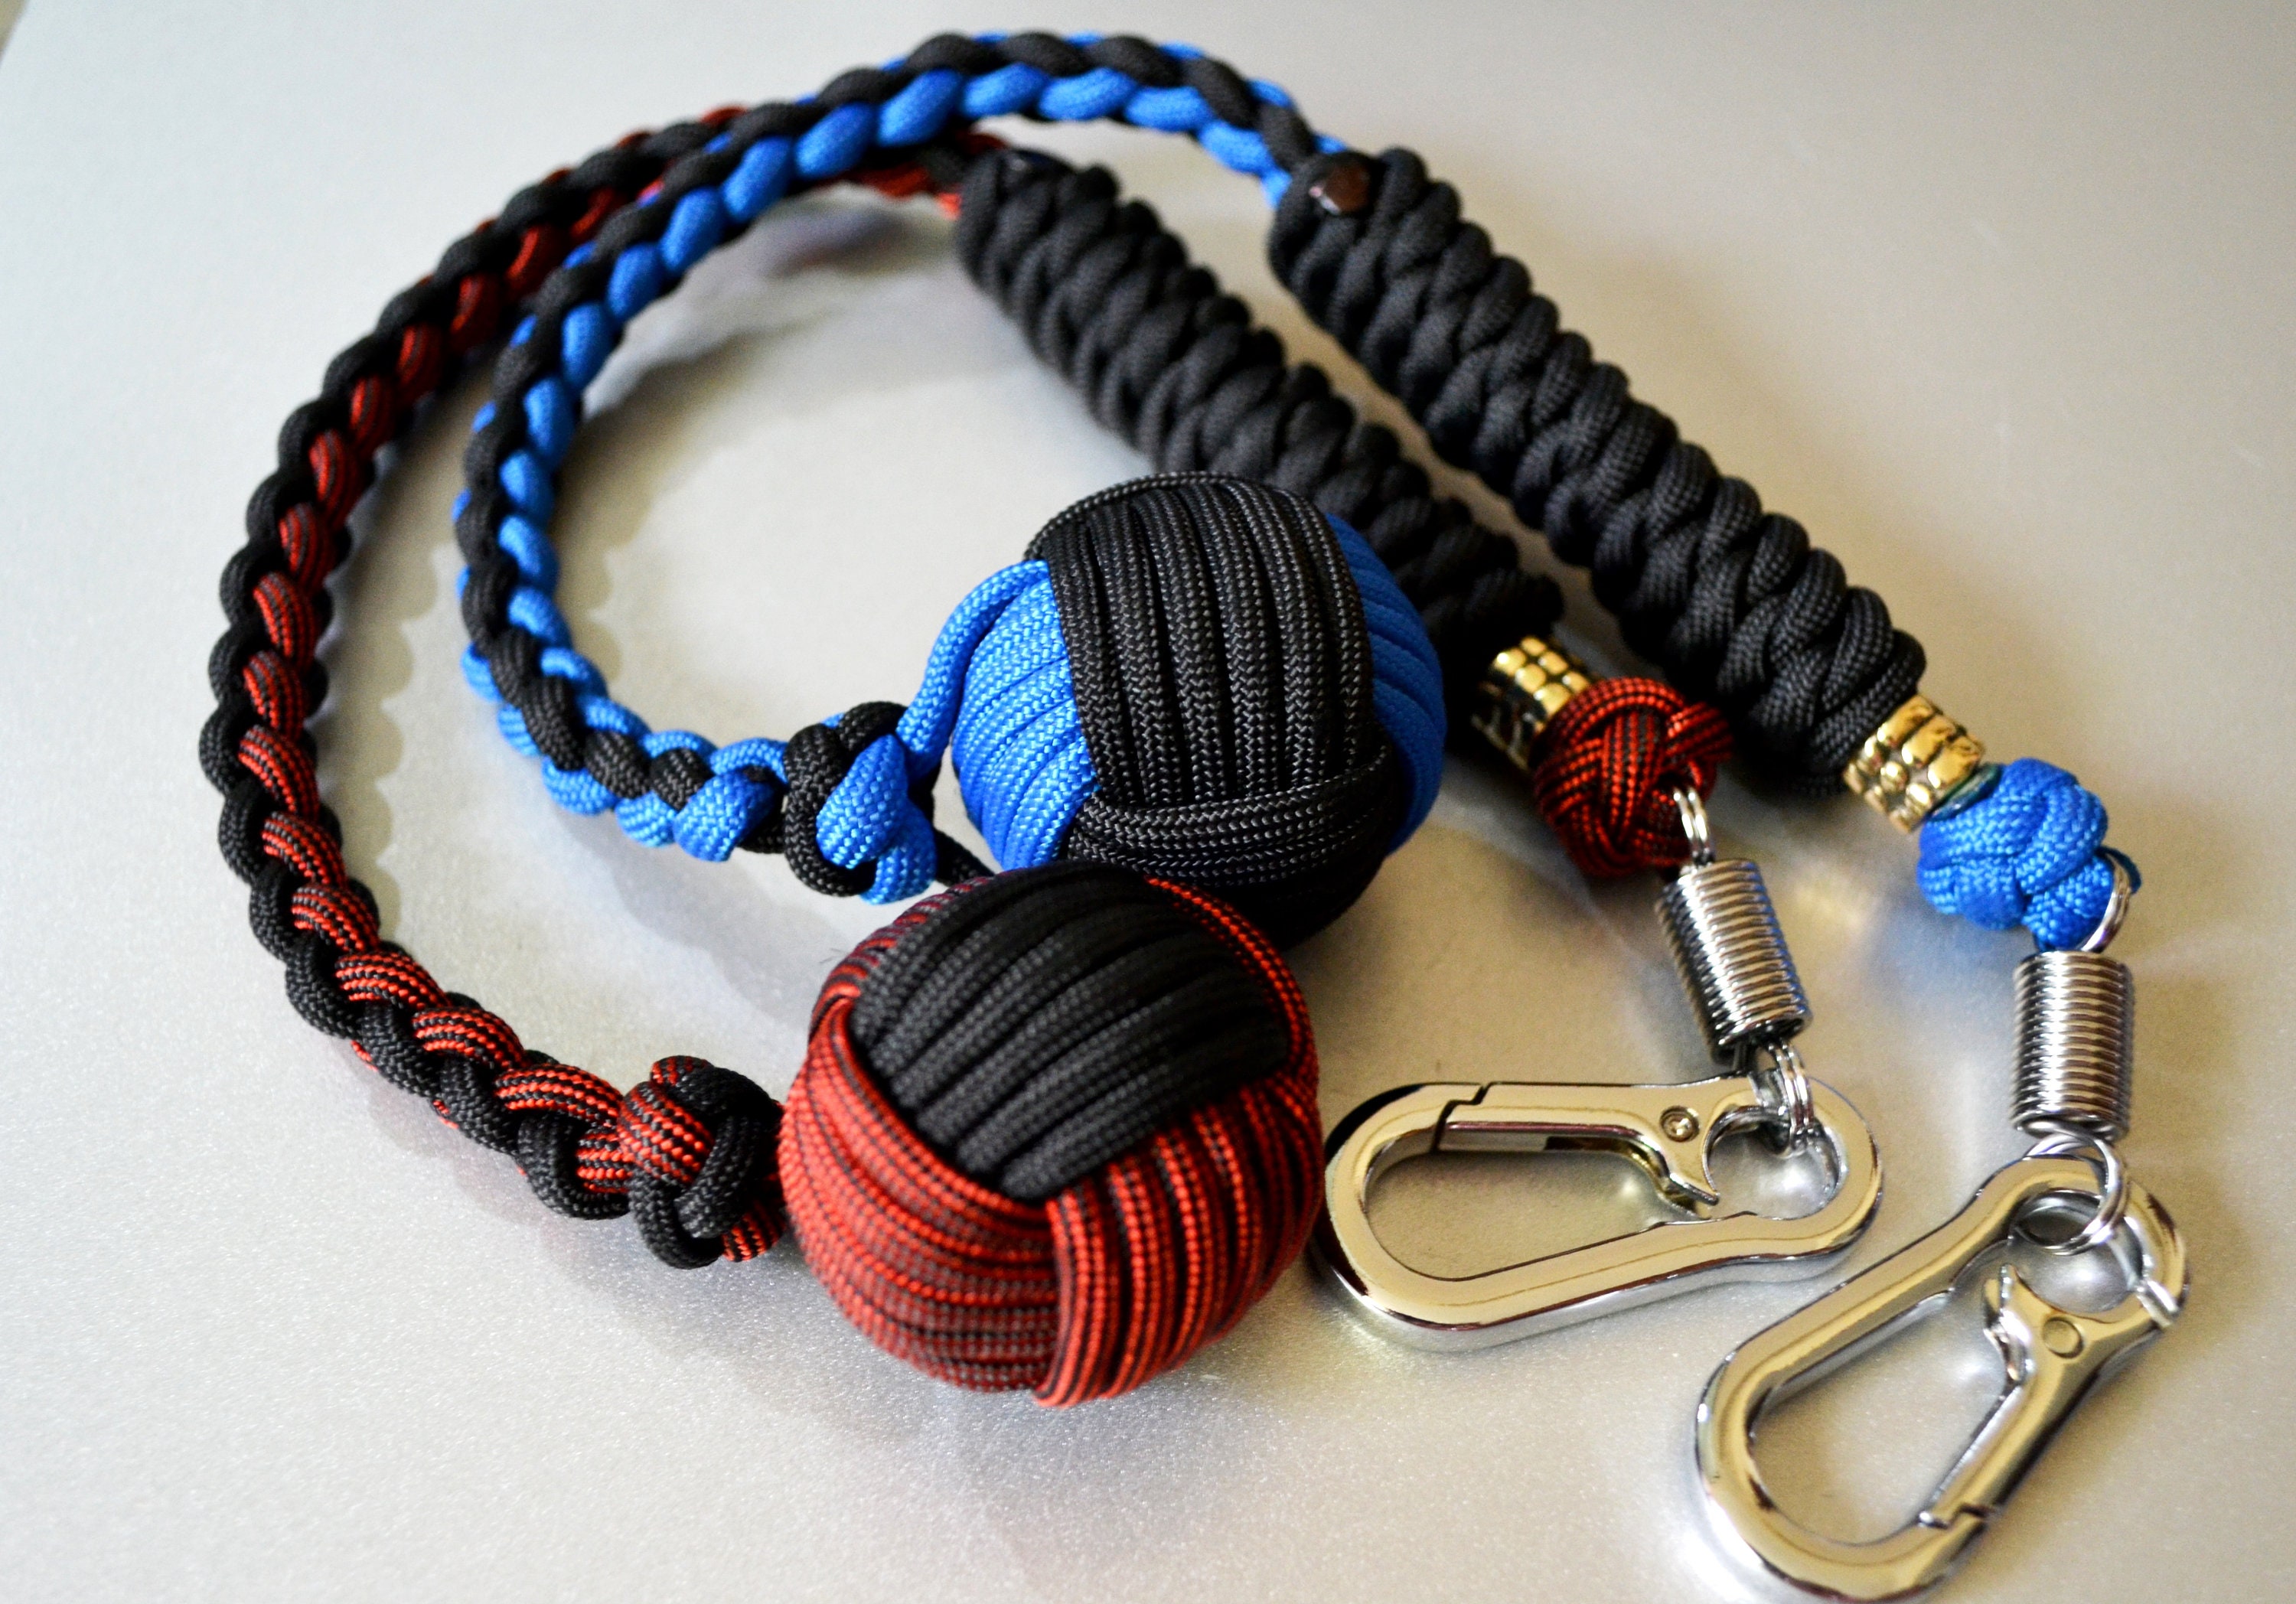 Home  Monkey Grips Paracord Accessories